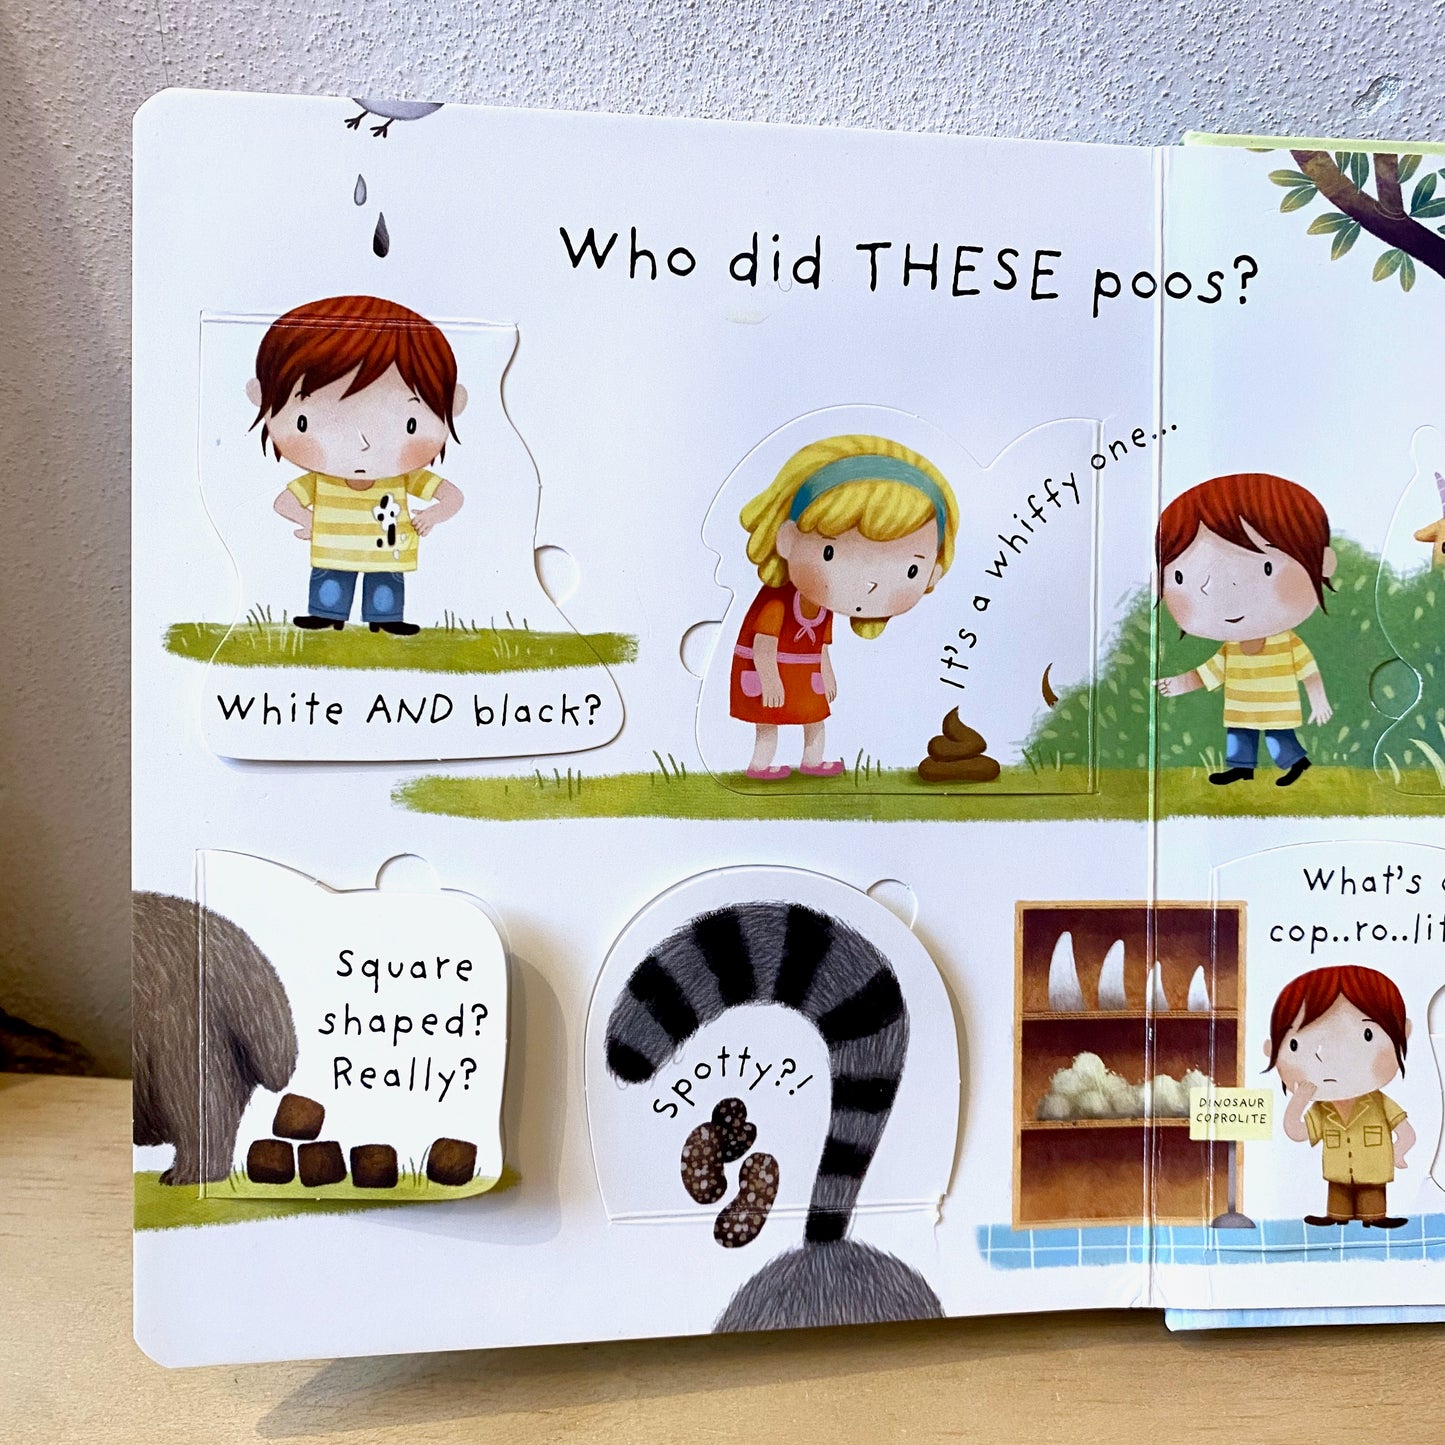 Lift-The-Flap Very First Questions and Answers: What Is Poo? / Katie Daynes